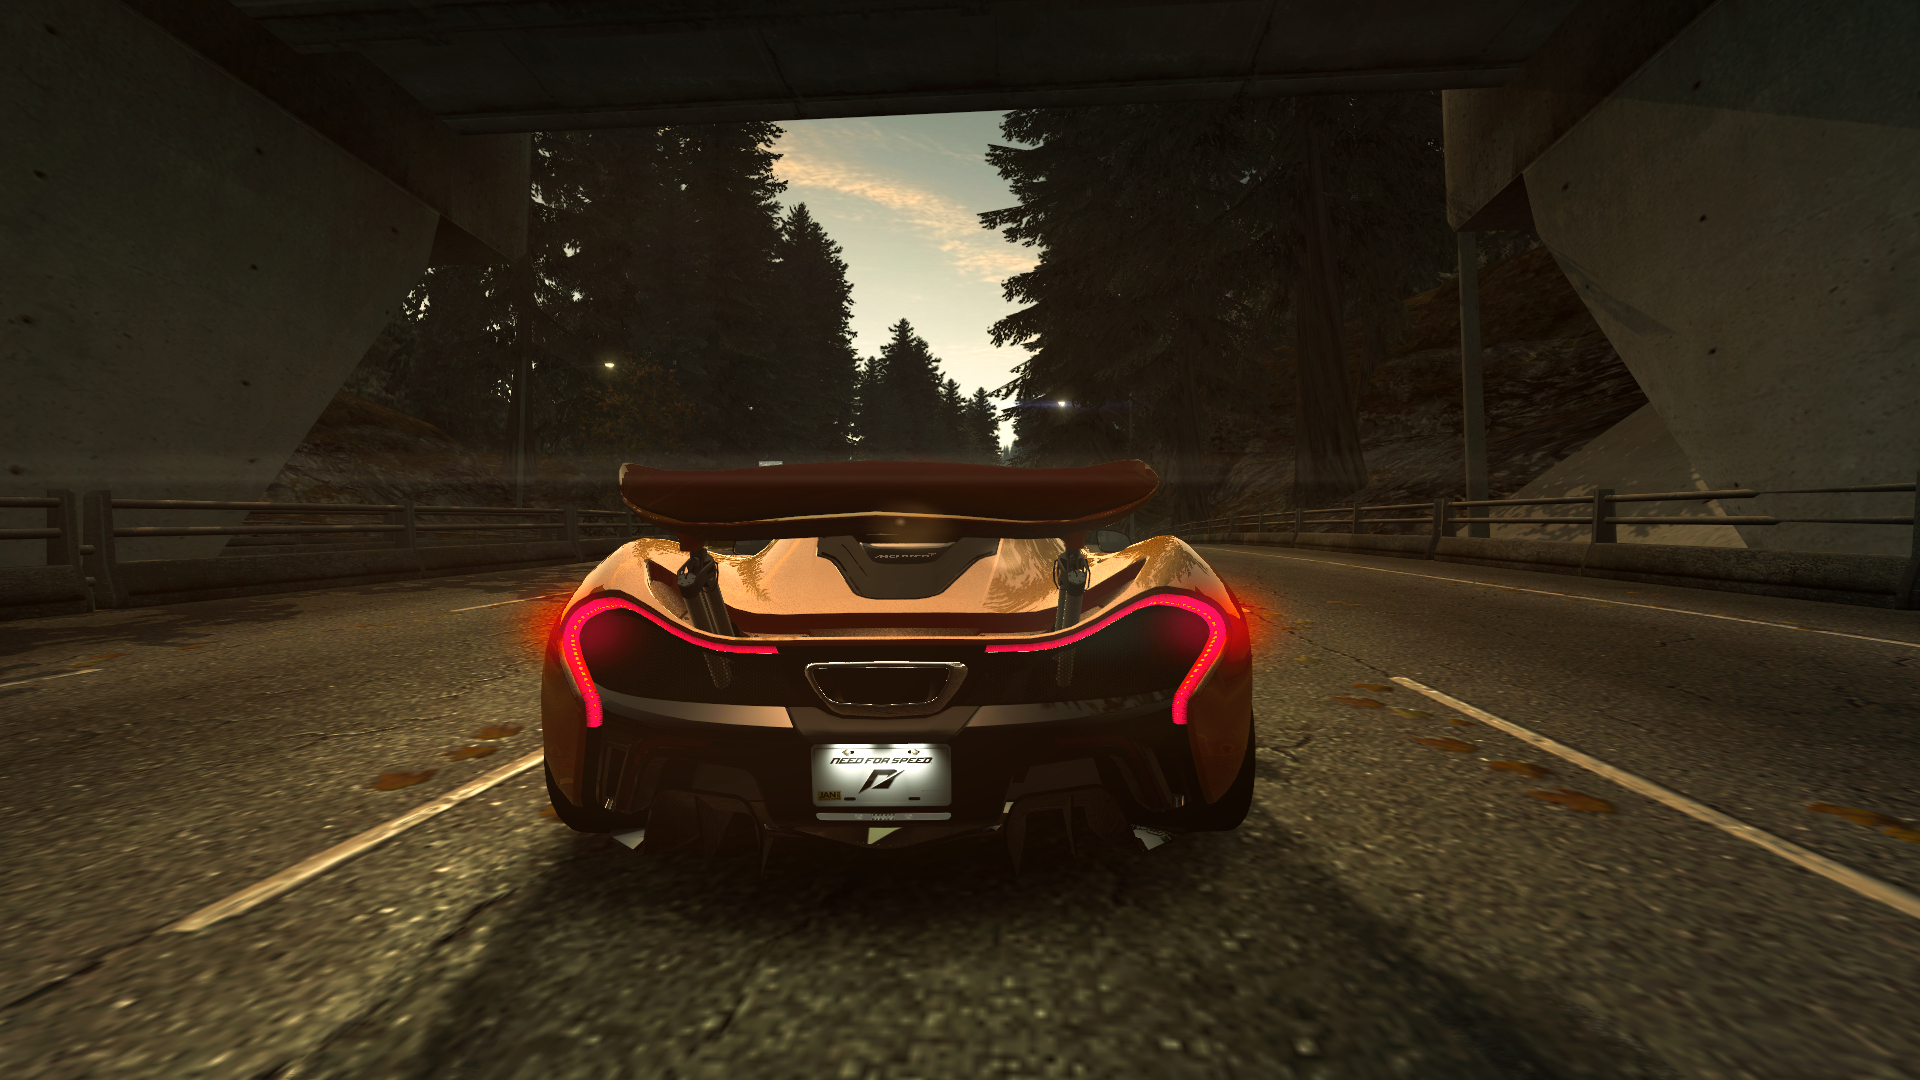 General 1920x1080 Need for Speed: World McLaren P1 supercars video games car vehicle screen shot PC gaming